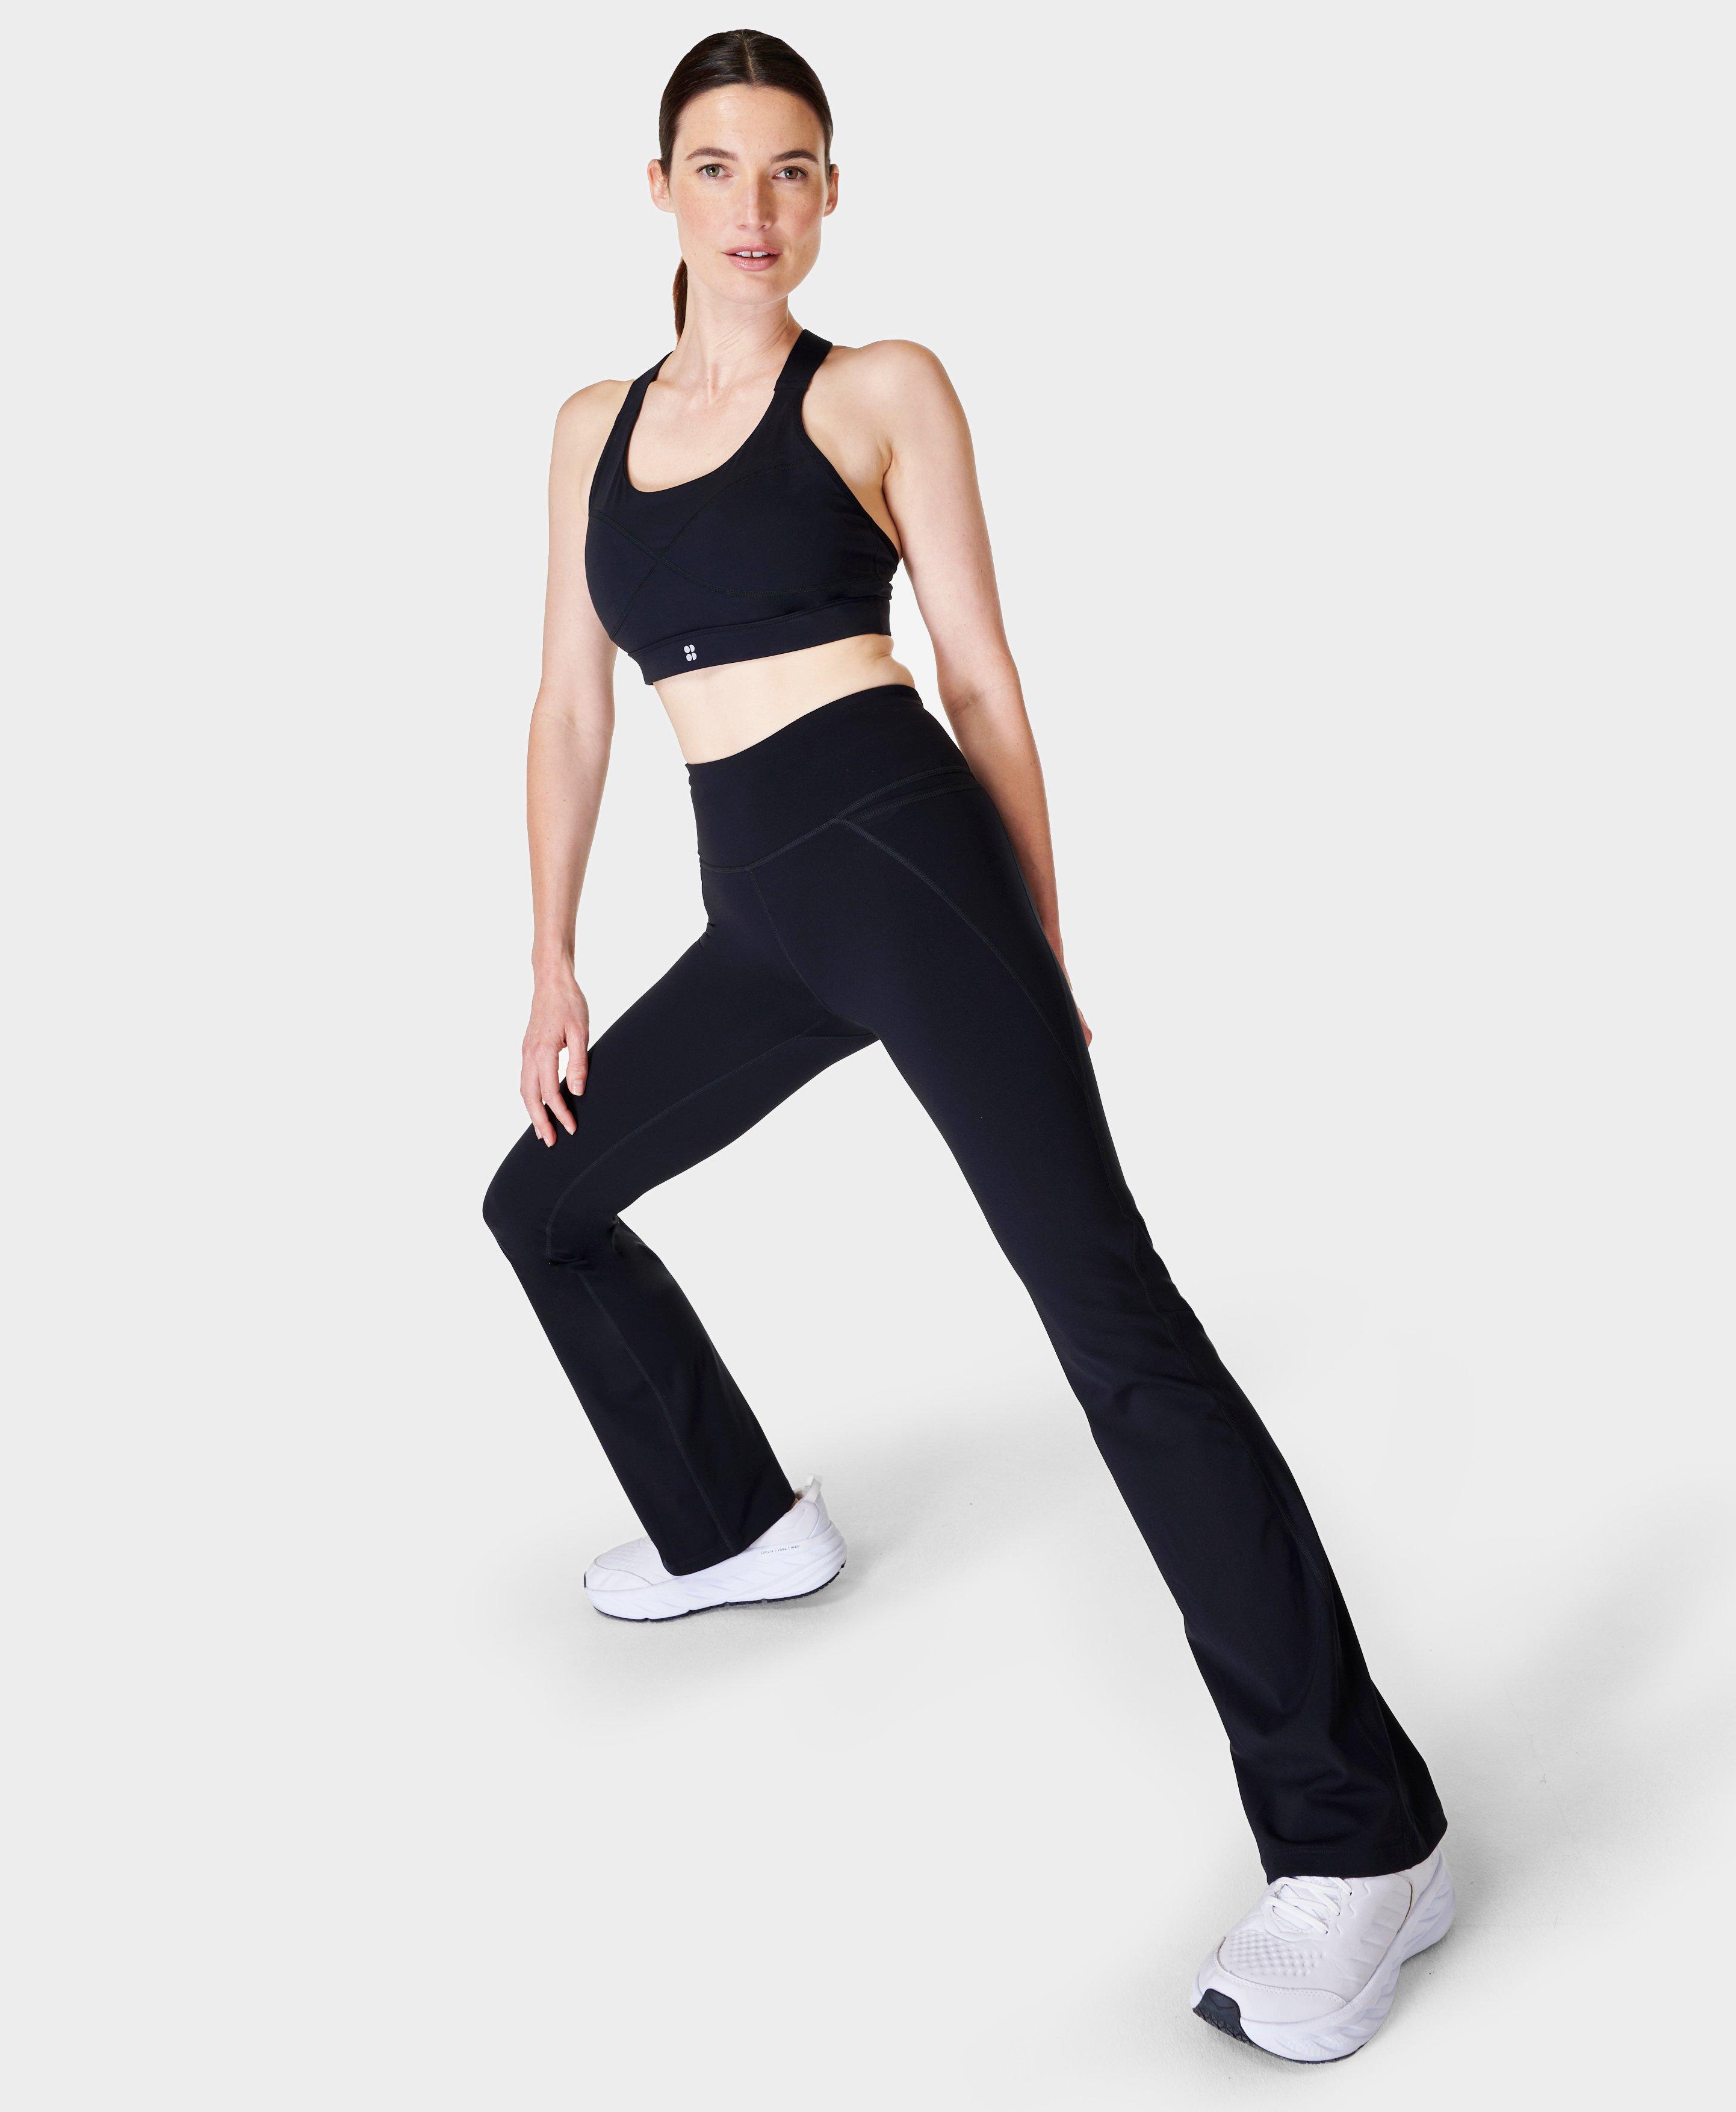 Trending Wholesale dri fit pants women s At Affordable Prices